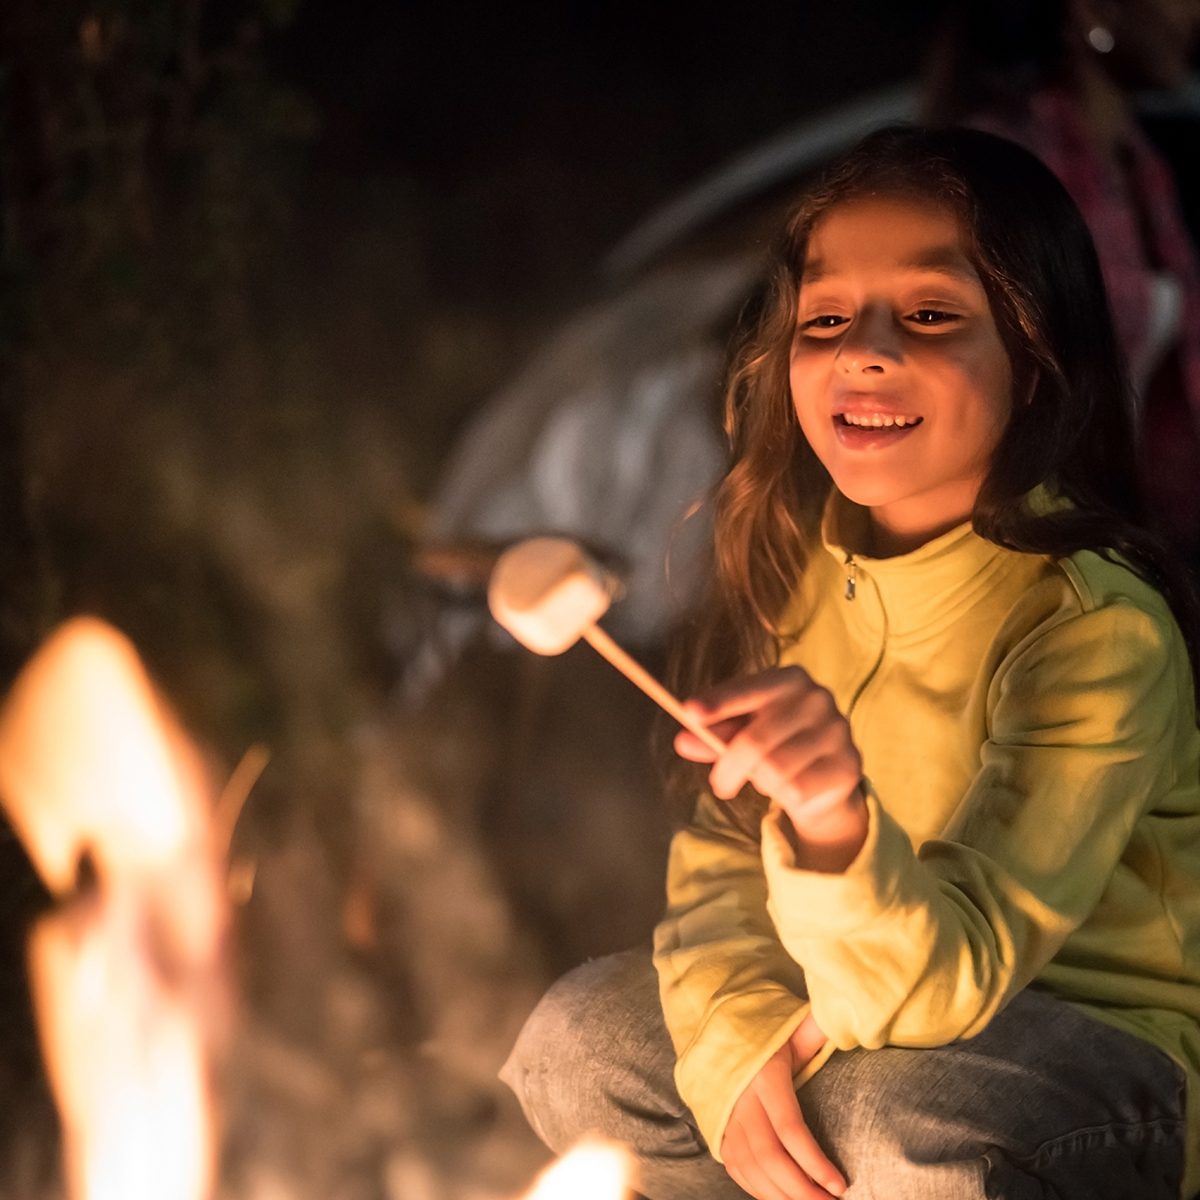 easter egg hunt ideas Portrait of a happy girl sitting outdoors by a bonfire eating marshmallows â outdoors lifestyle concepts